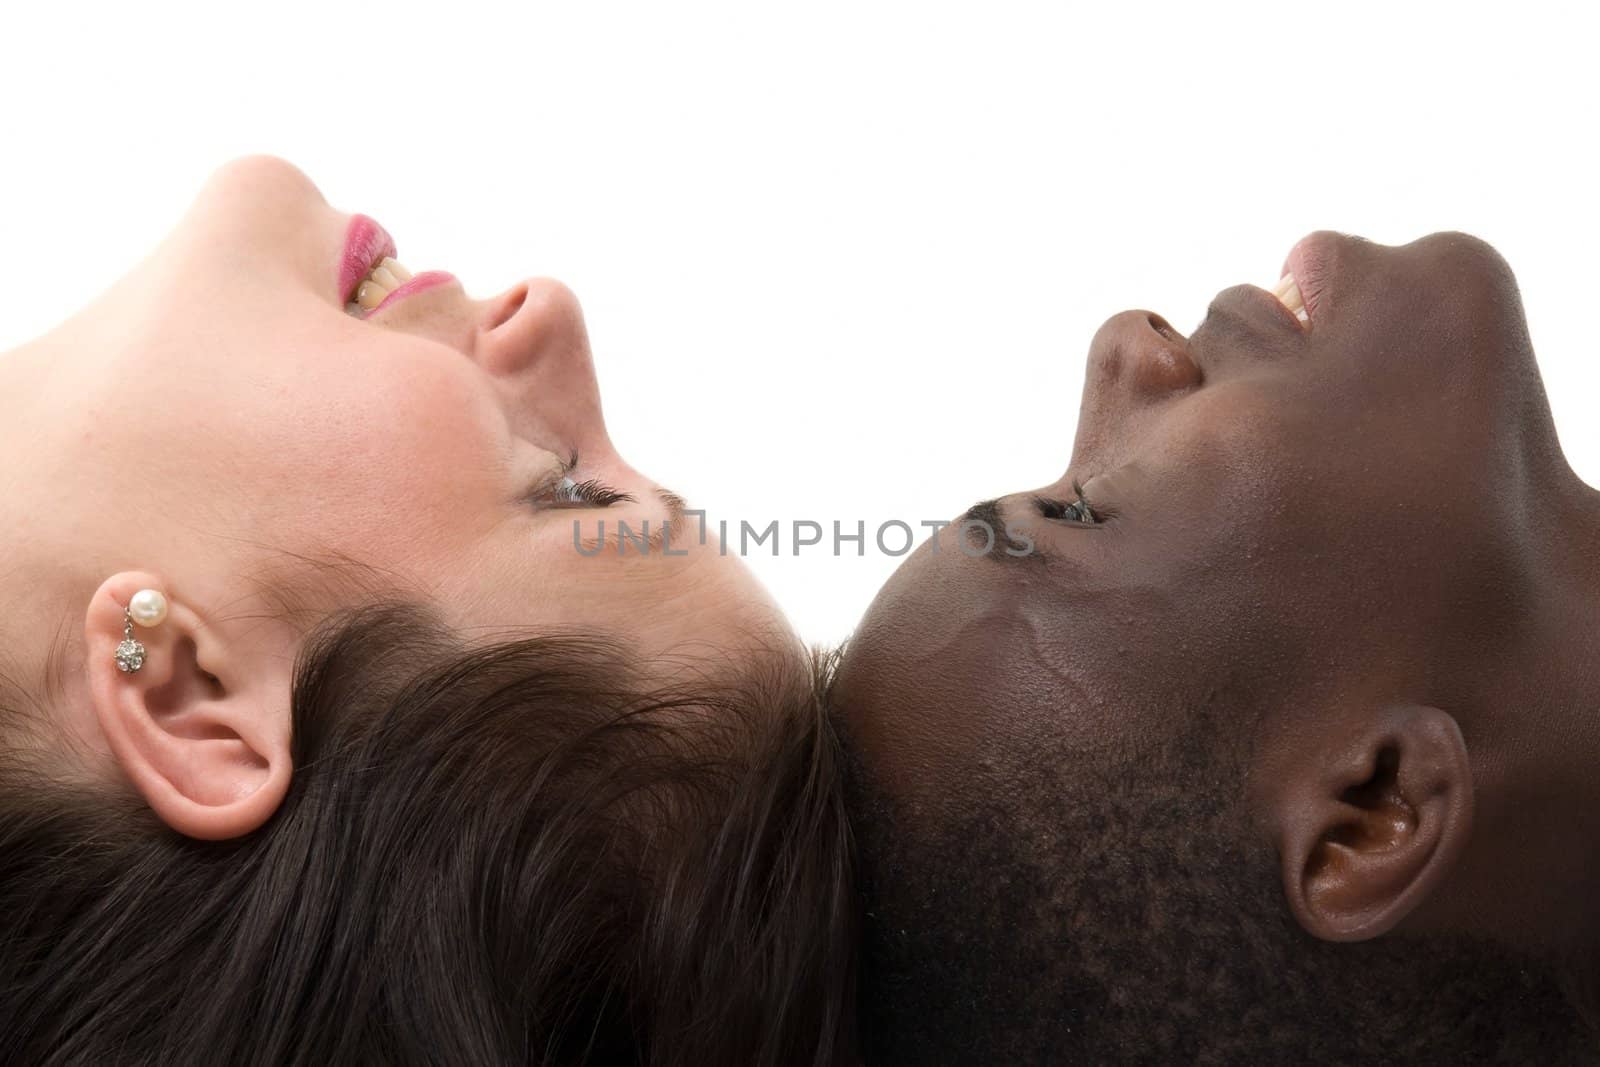 Two faces close up. Black man and white woman on a white background.